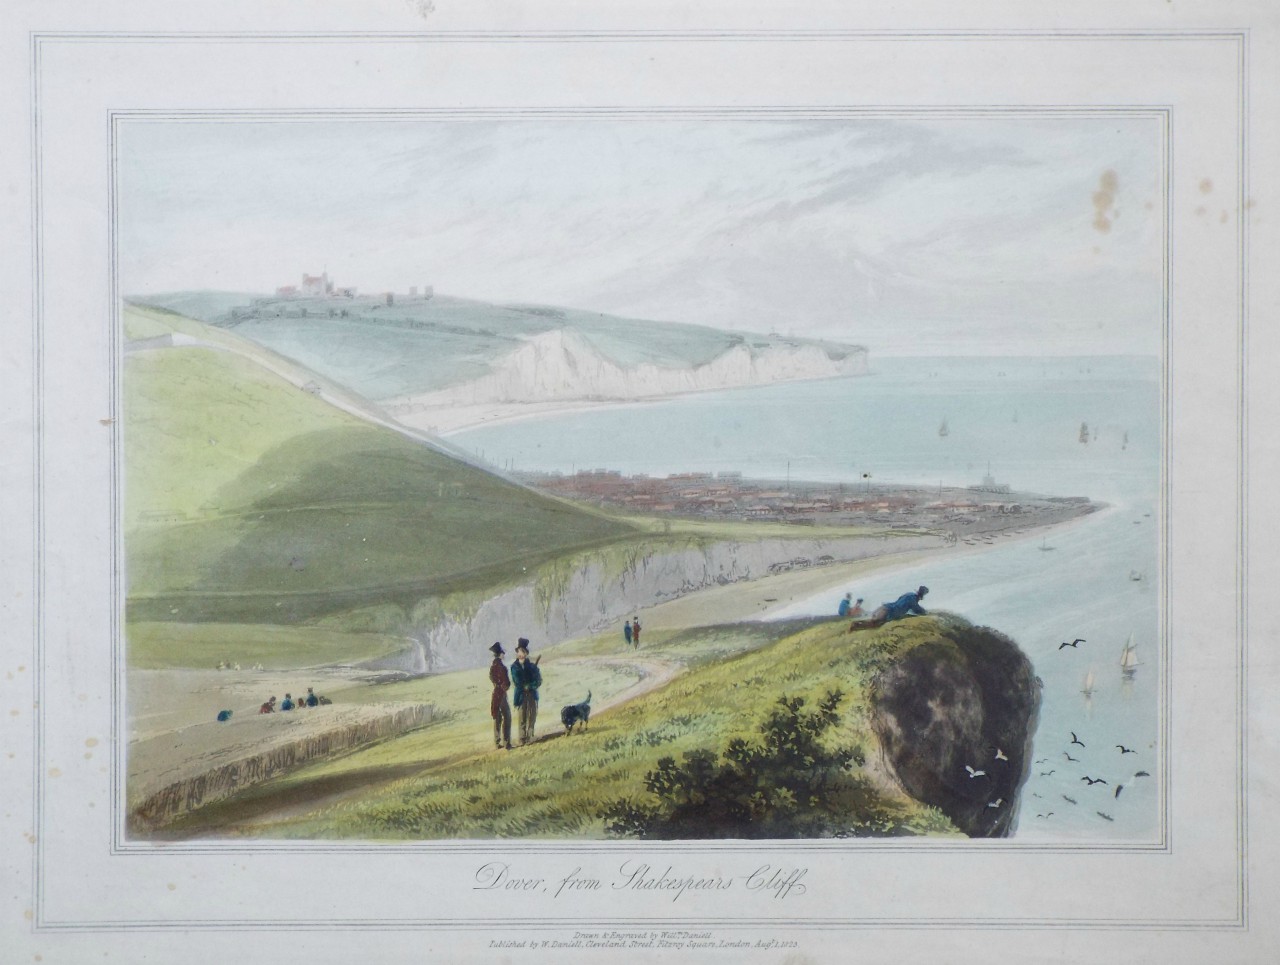 Aquatint - Dover, from Shakespears Cliff. - Daniell